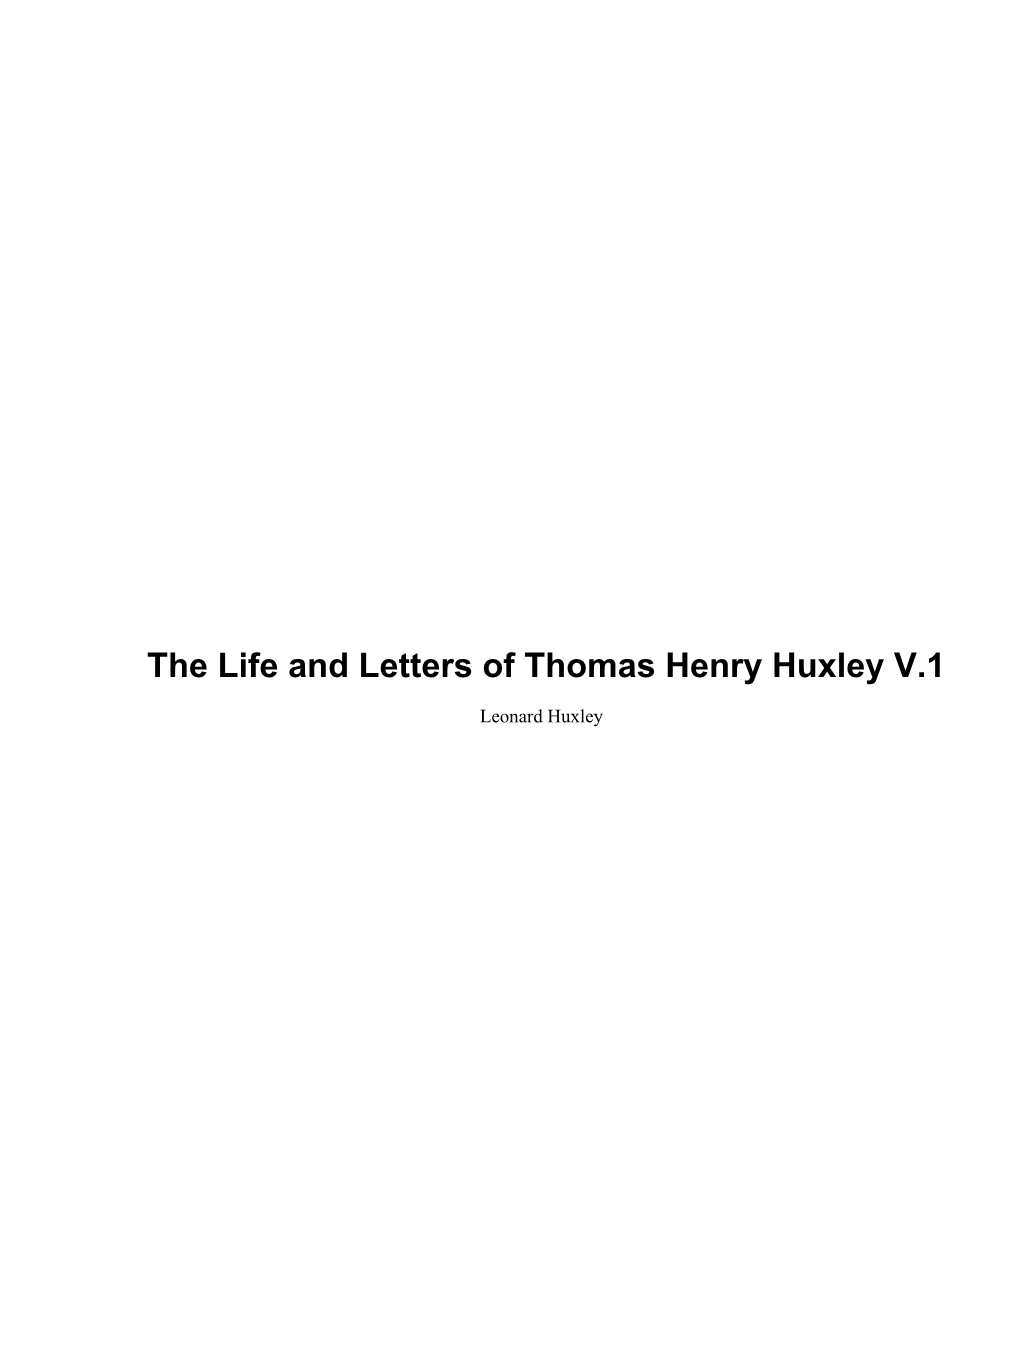 The Life and Letters of Thomas Henry Huxley V.1